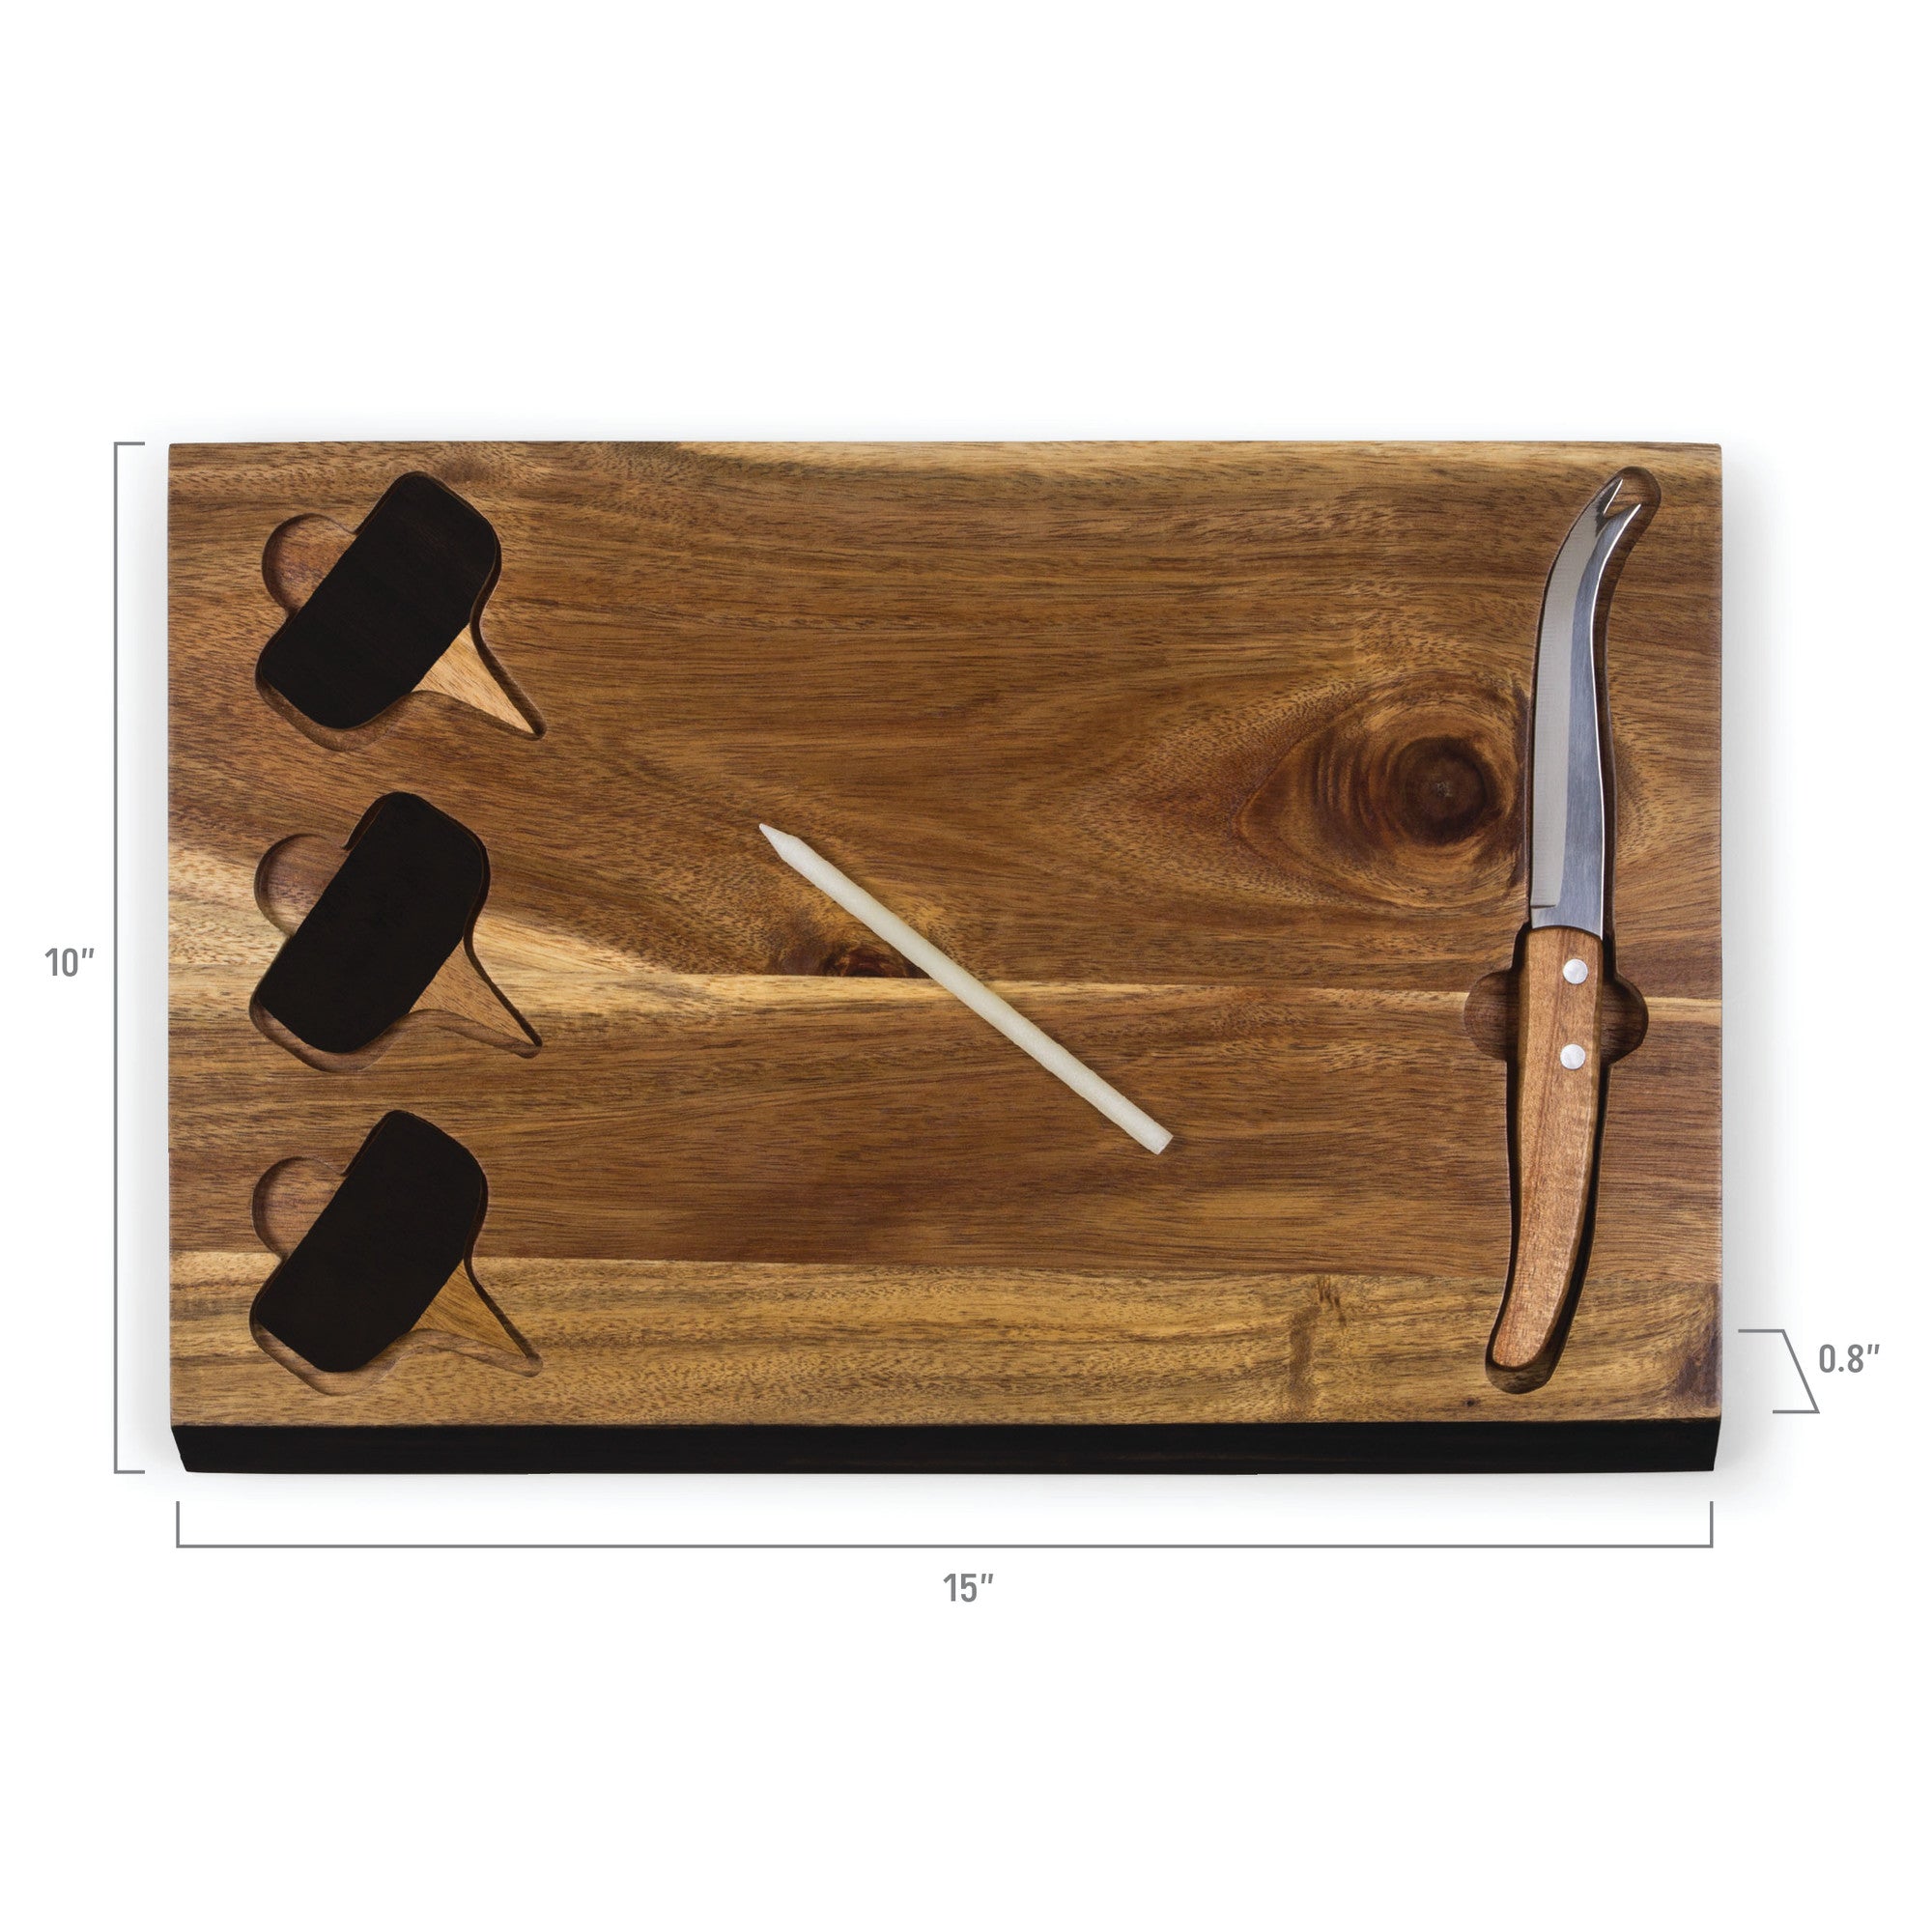 Beauty & the Beast - Delio Acacia Cheese Cutting Board & Tools Set